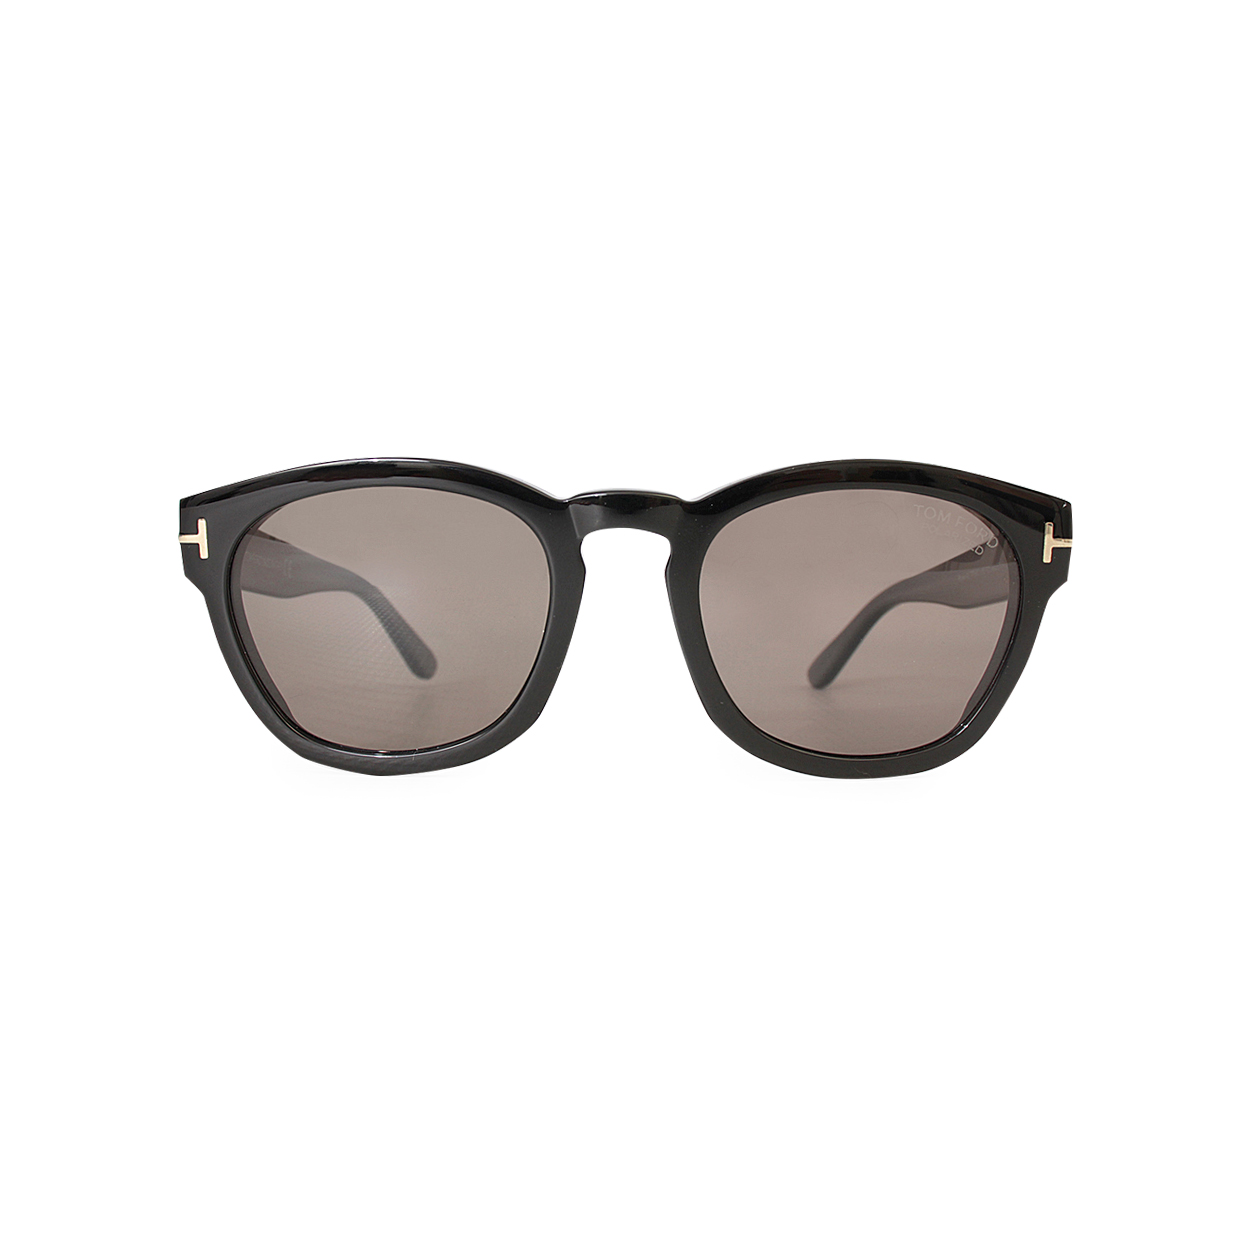 TOM FORD Bryan-02 Sunglasses TF590 Black - NEW | Luxity